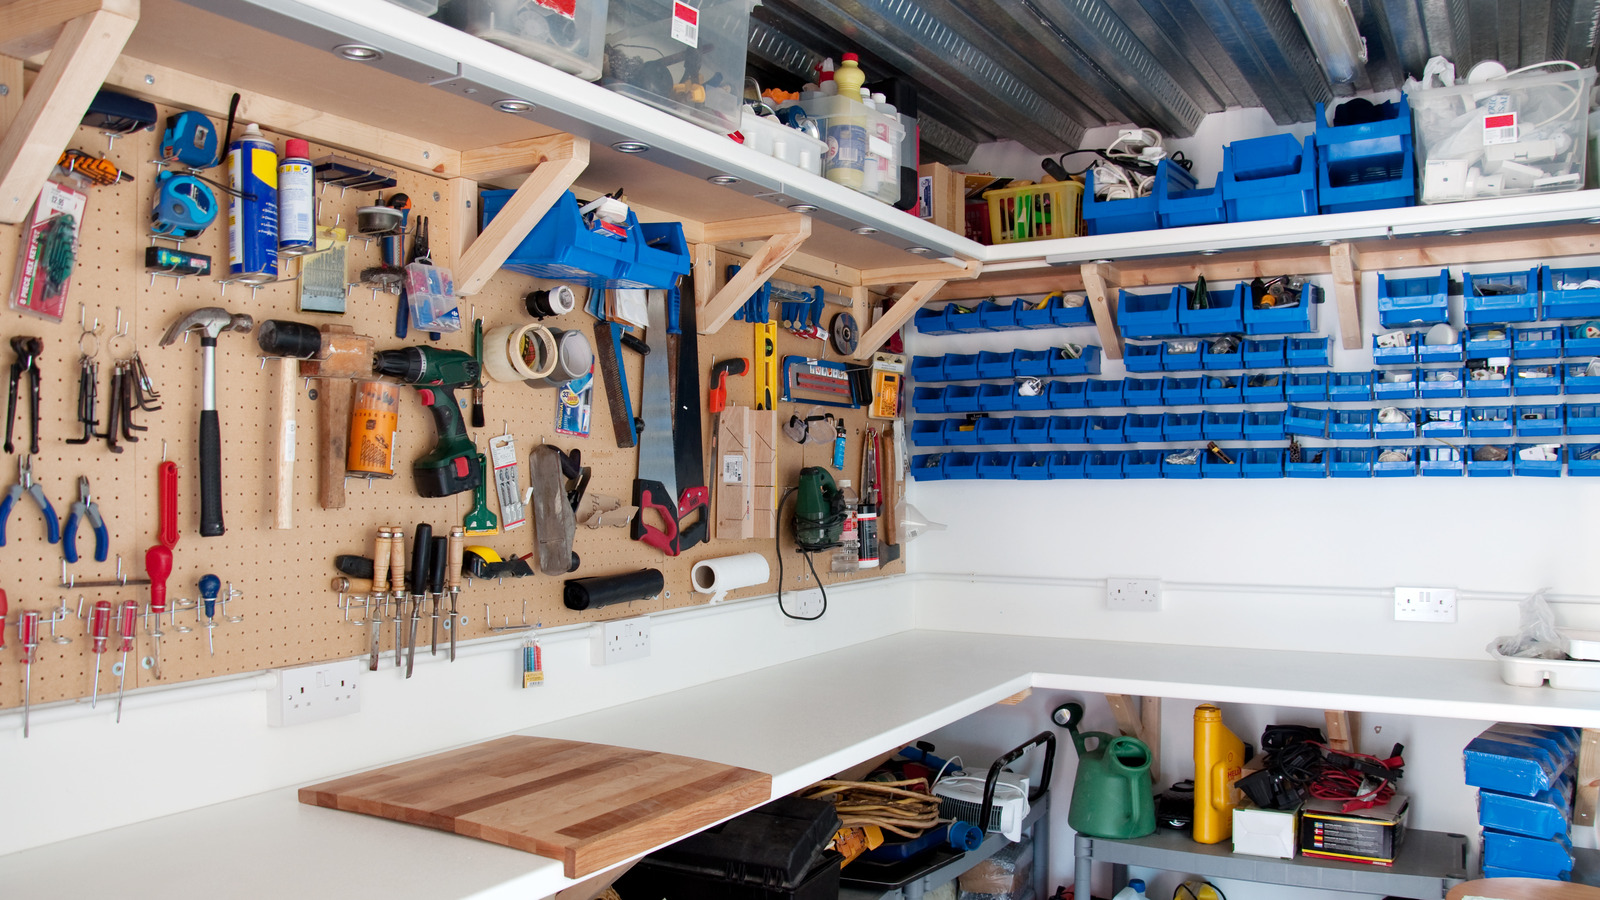 13 Amazing Garage Storage Ideas You Can Do Yourself - Practical